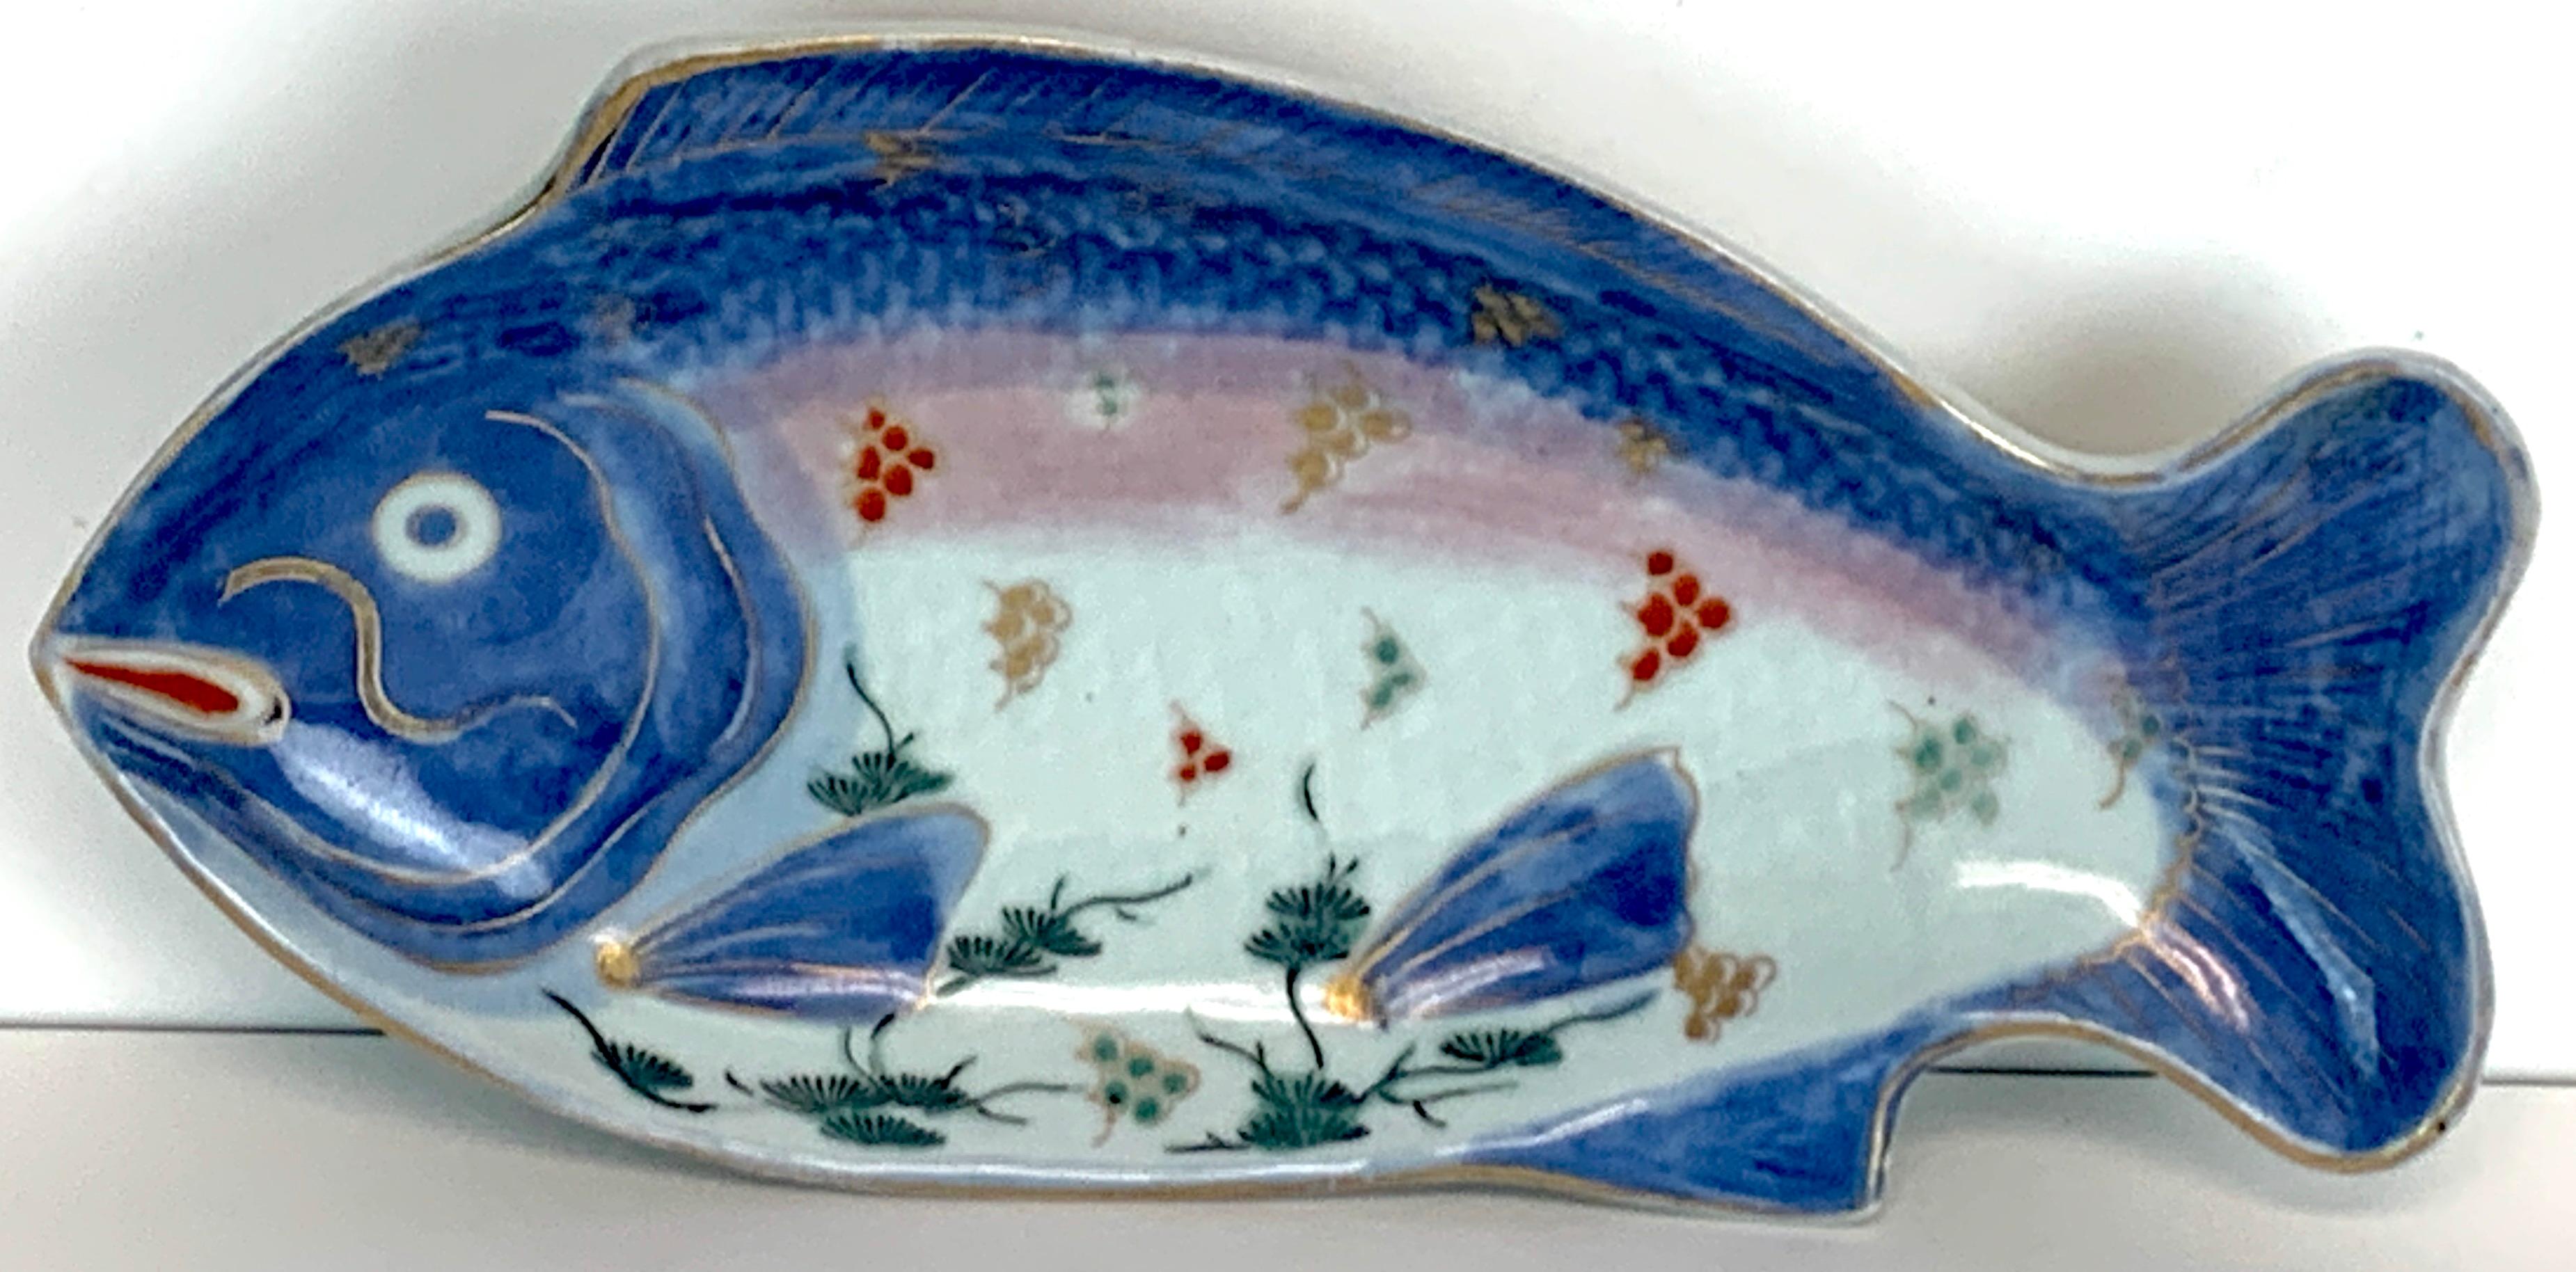 Meiji Imari fish plate, by Fukagawa VIII
A fine diminutive example, well decorated, marked, circa 1890
This examples measures 10-inches wide x 5.5-inches high.
Part of a collection of Eight Fine Imari examples, The VIII is for internal inventory